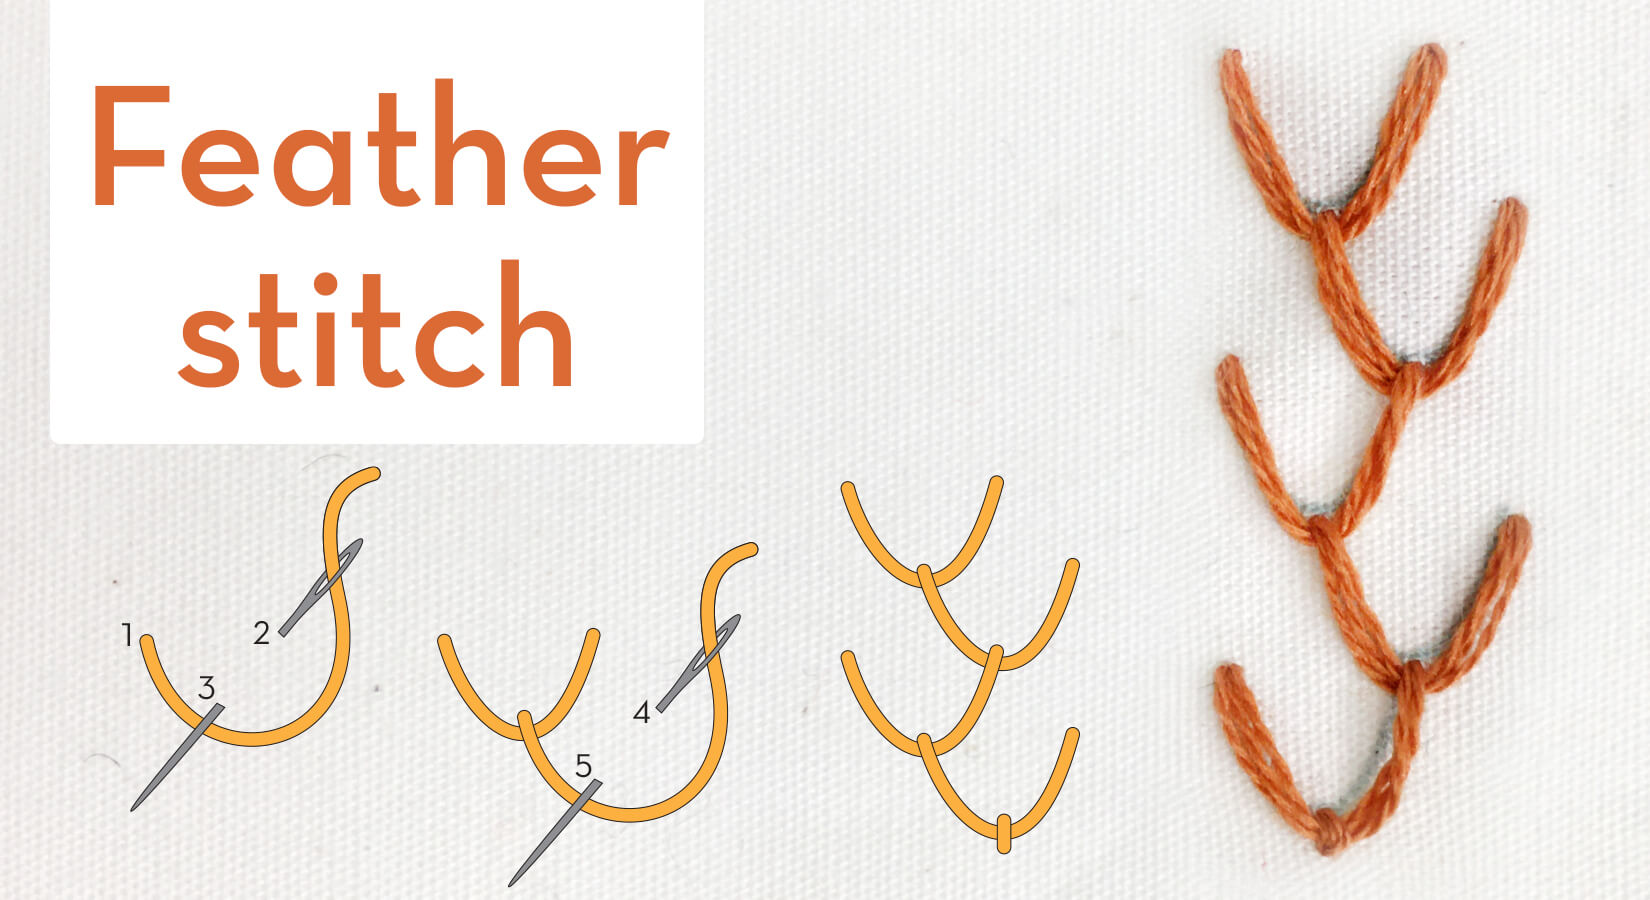 Feather stitch - embroidery stitches